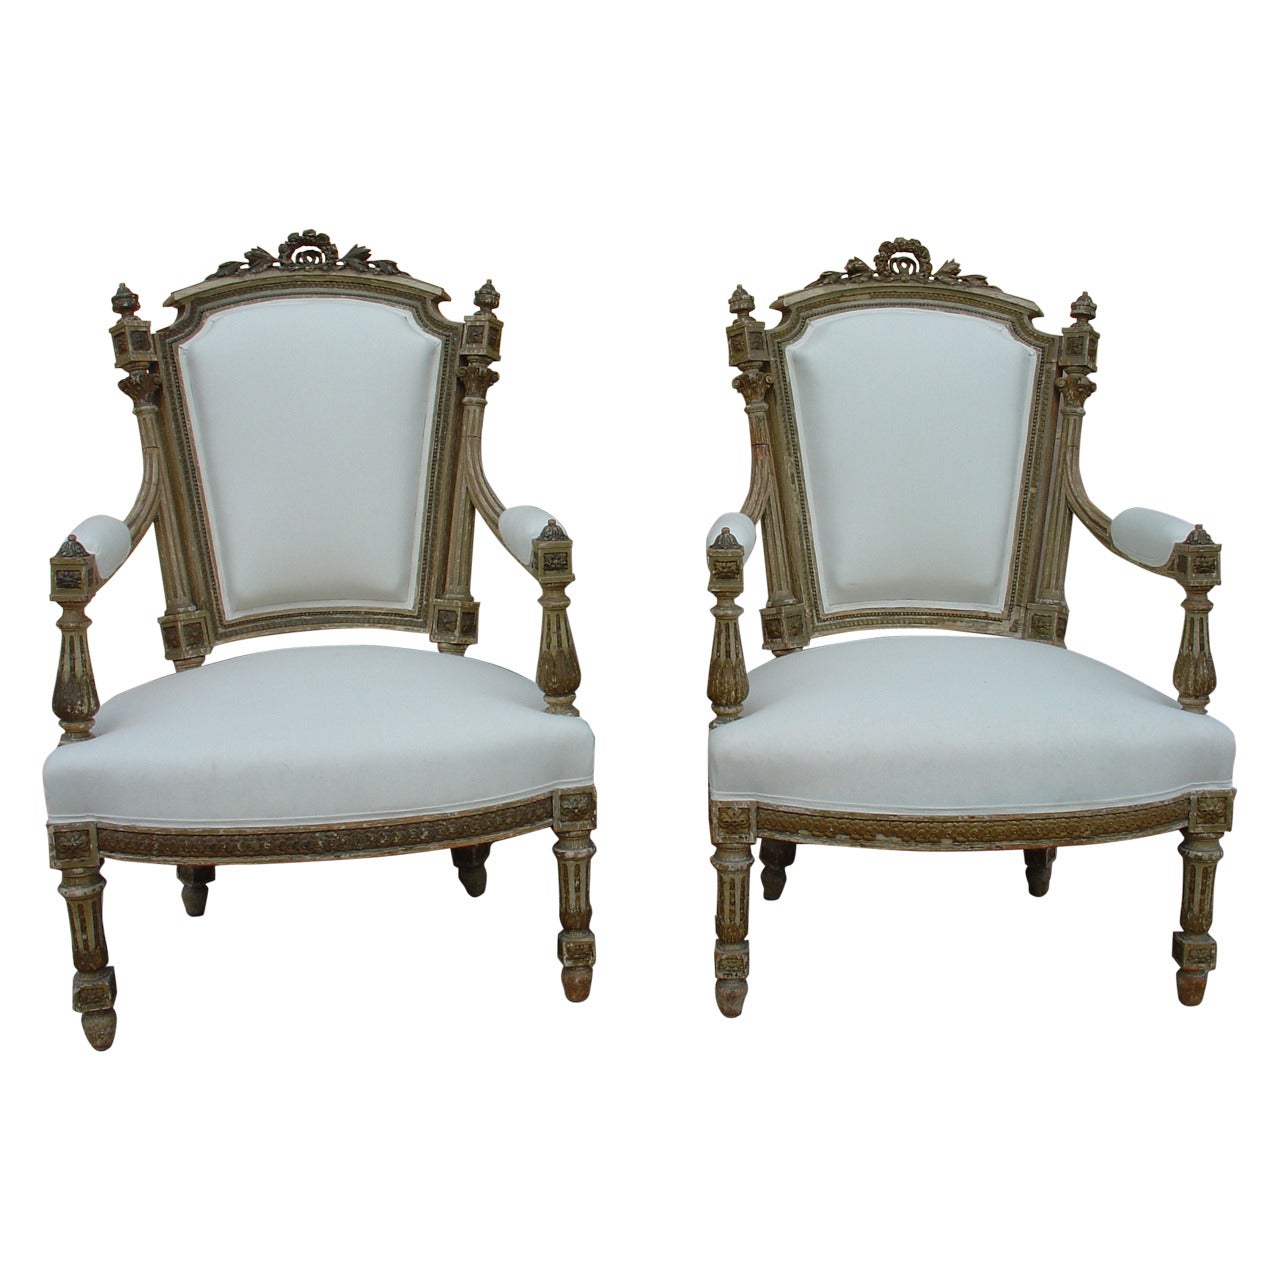 Pair of Painted Antique Louis XVI Style Armchairs, circa 1850